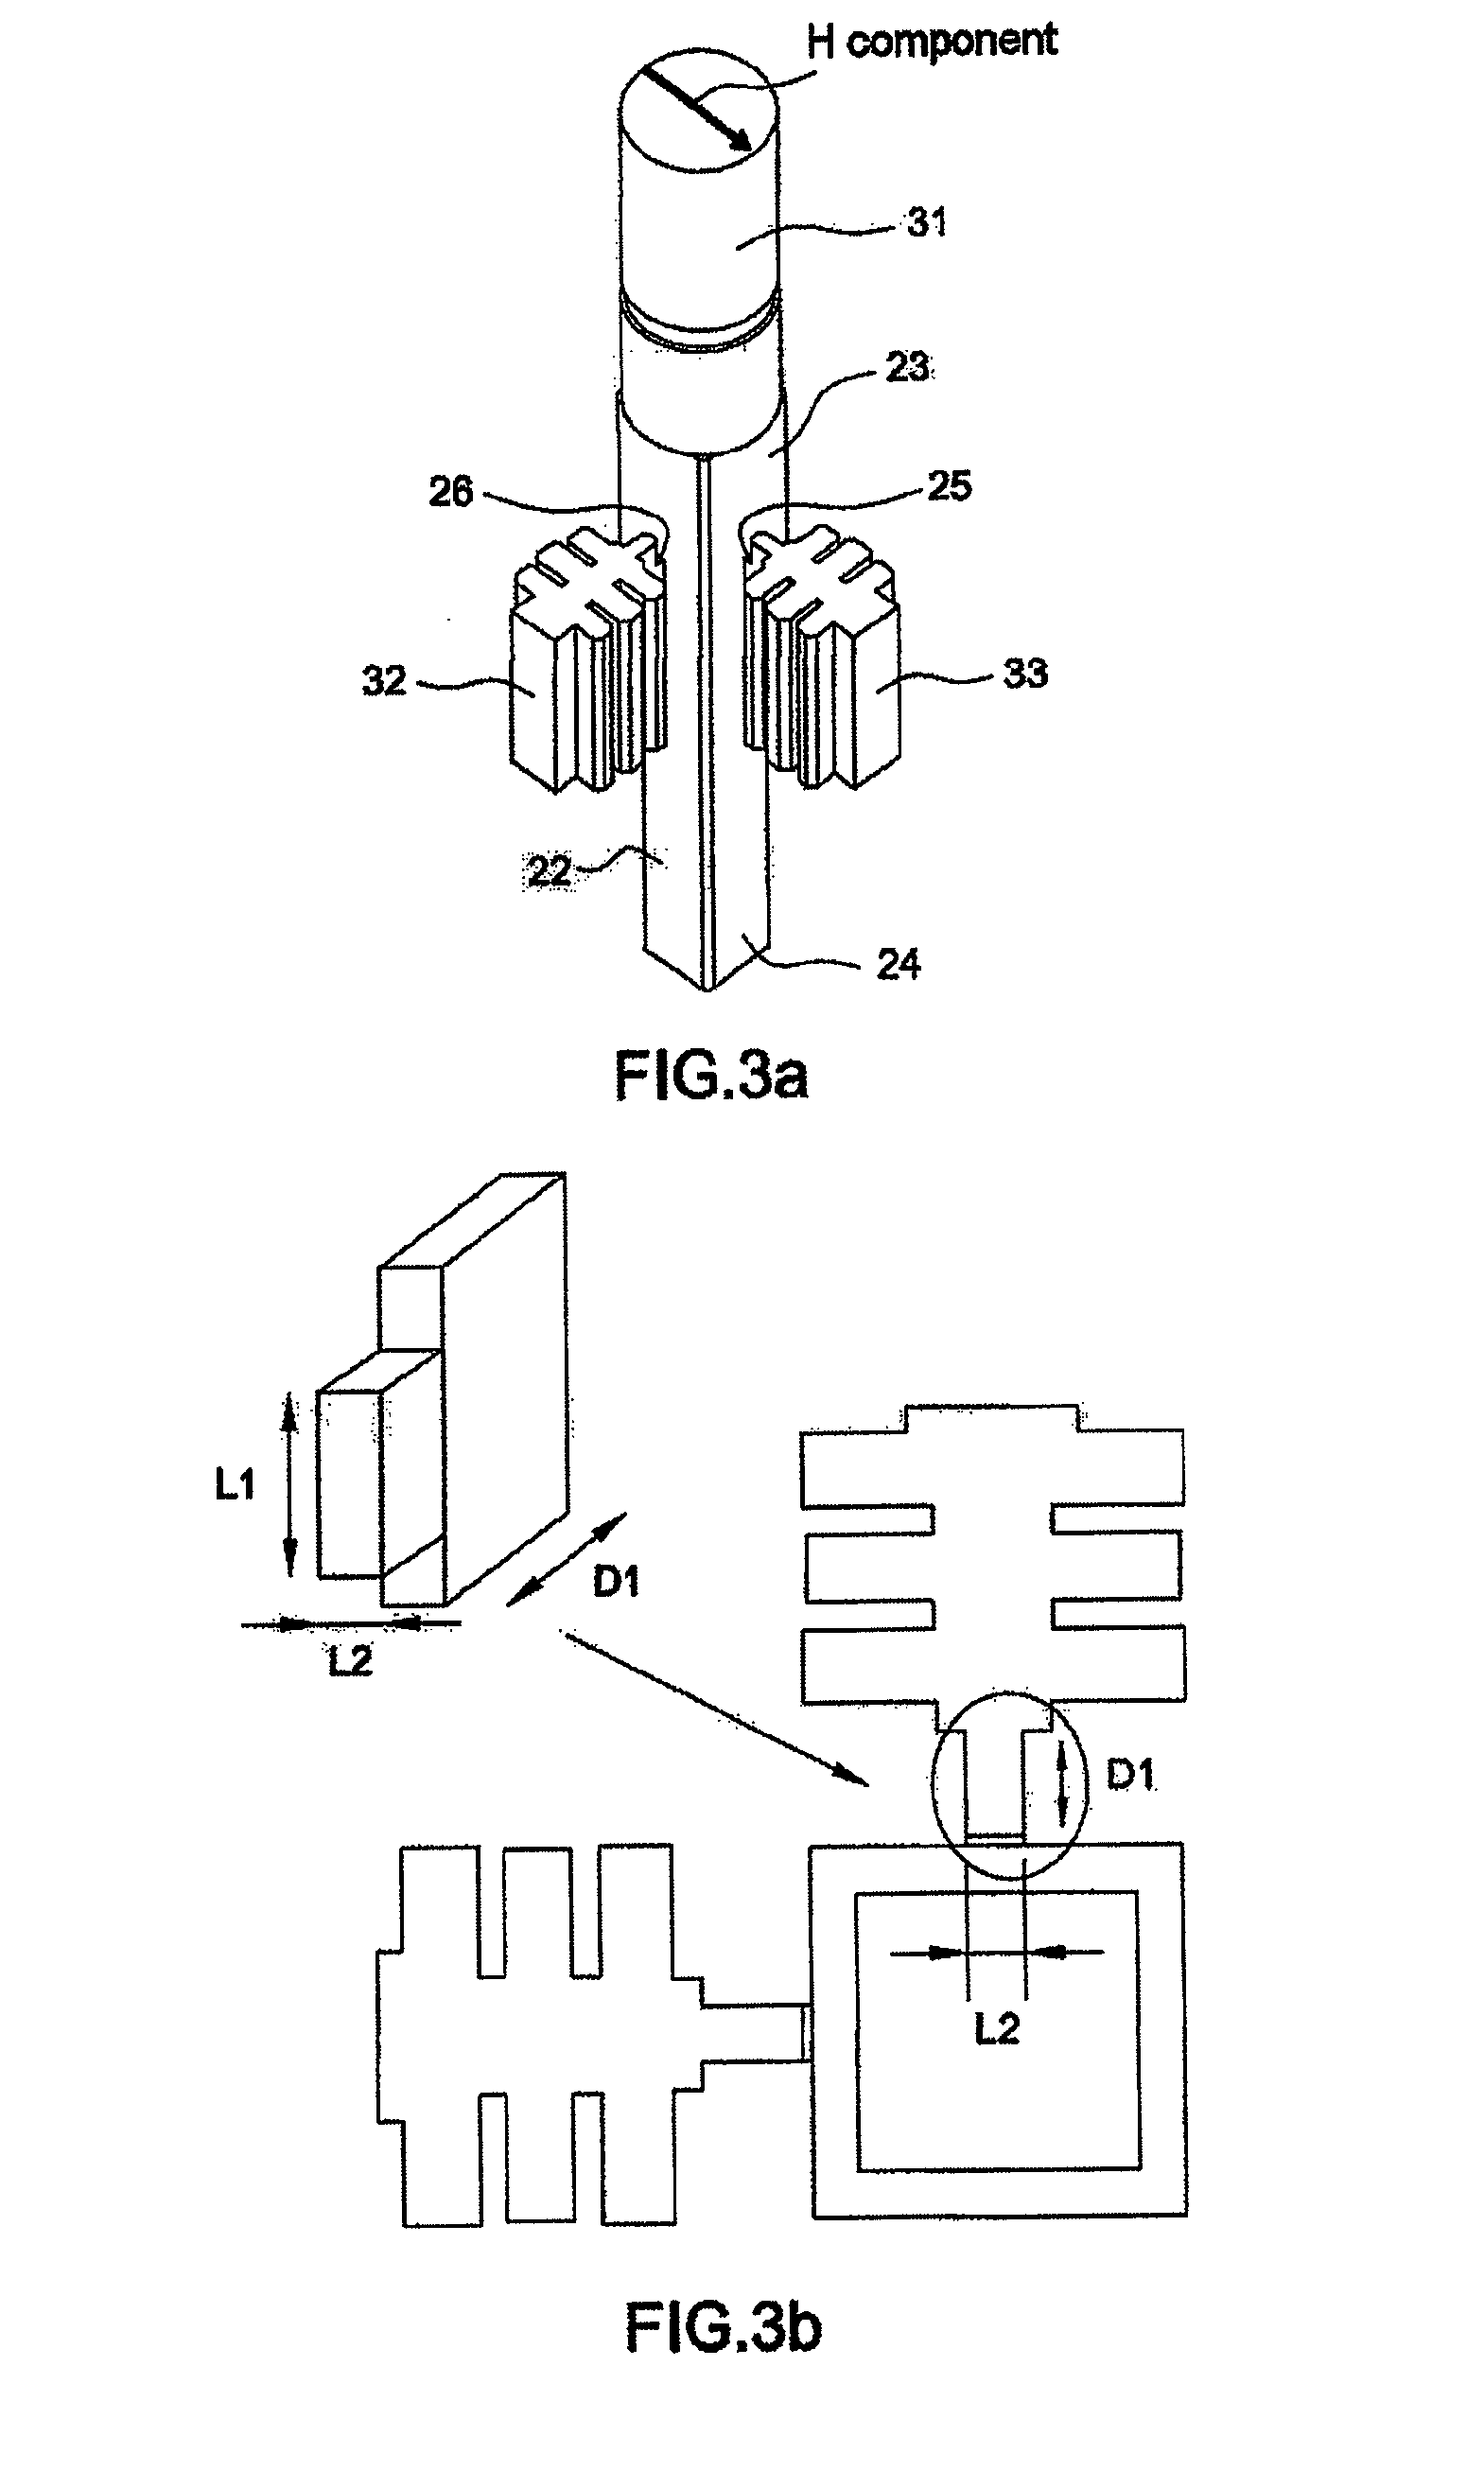 Compact Excitation Assembly for Generating a Circular Polarization in an Antenna and Method of Fashioning Such a Compact Excitation Assembly